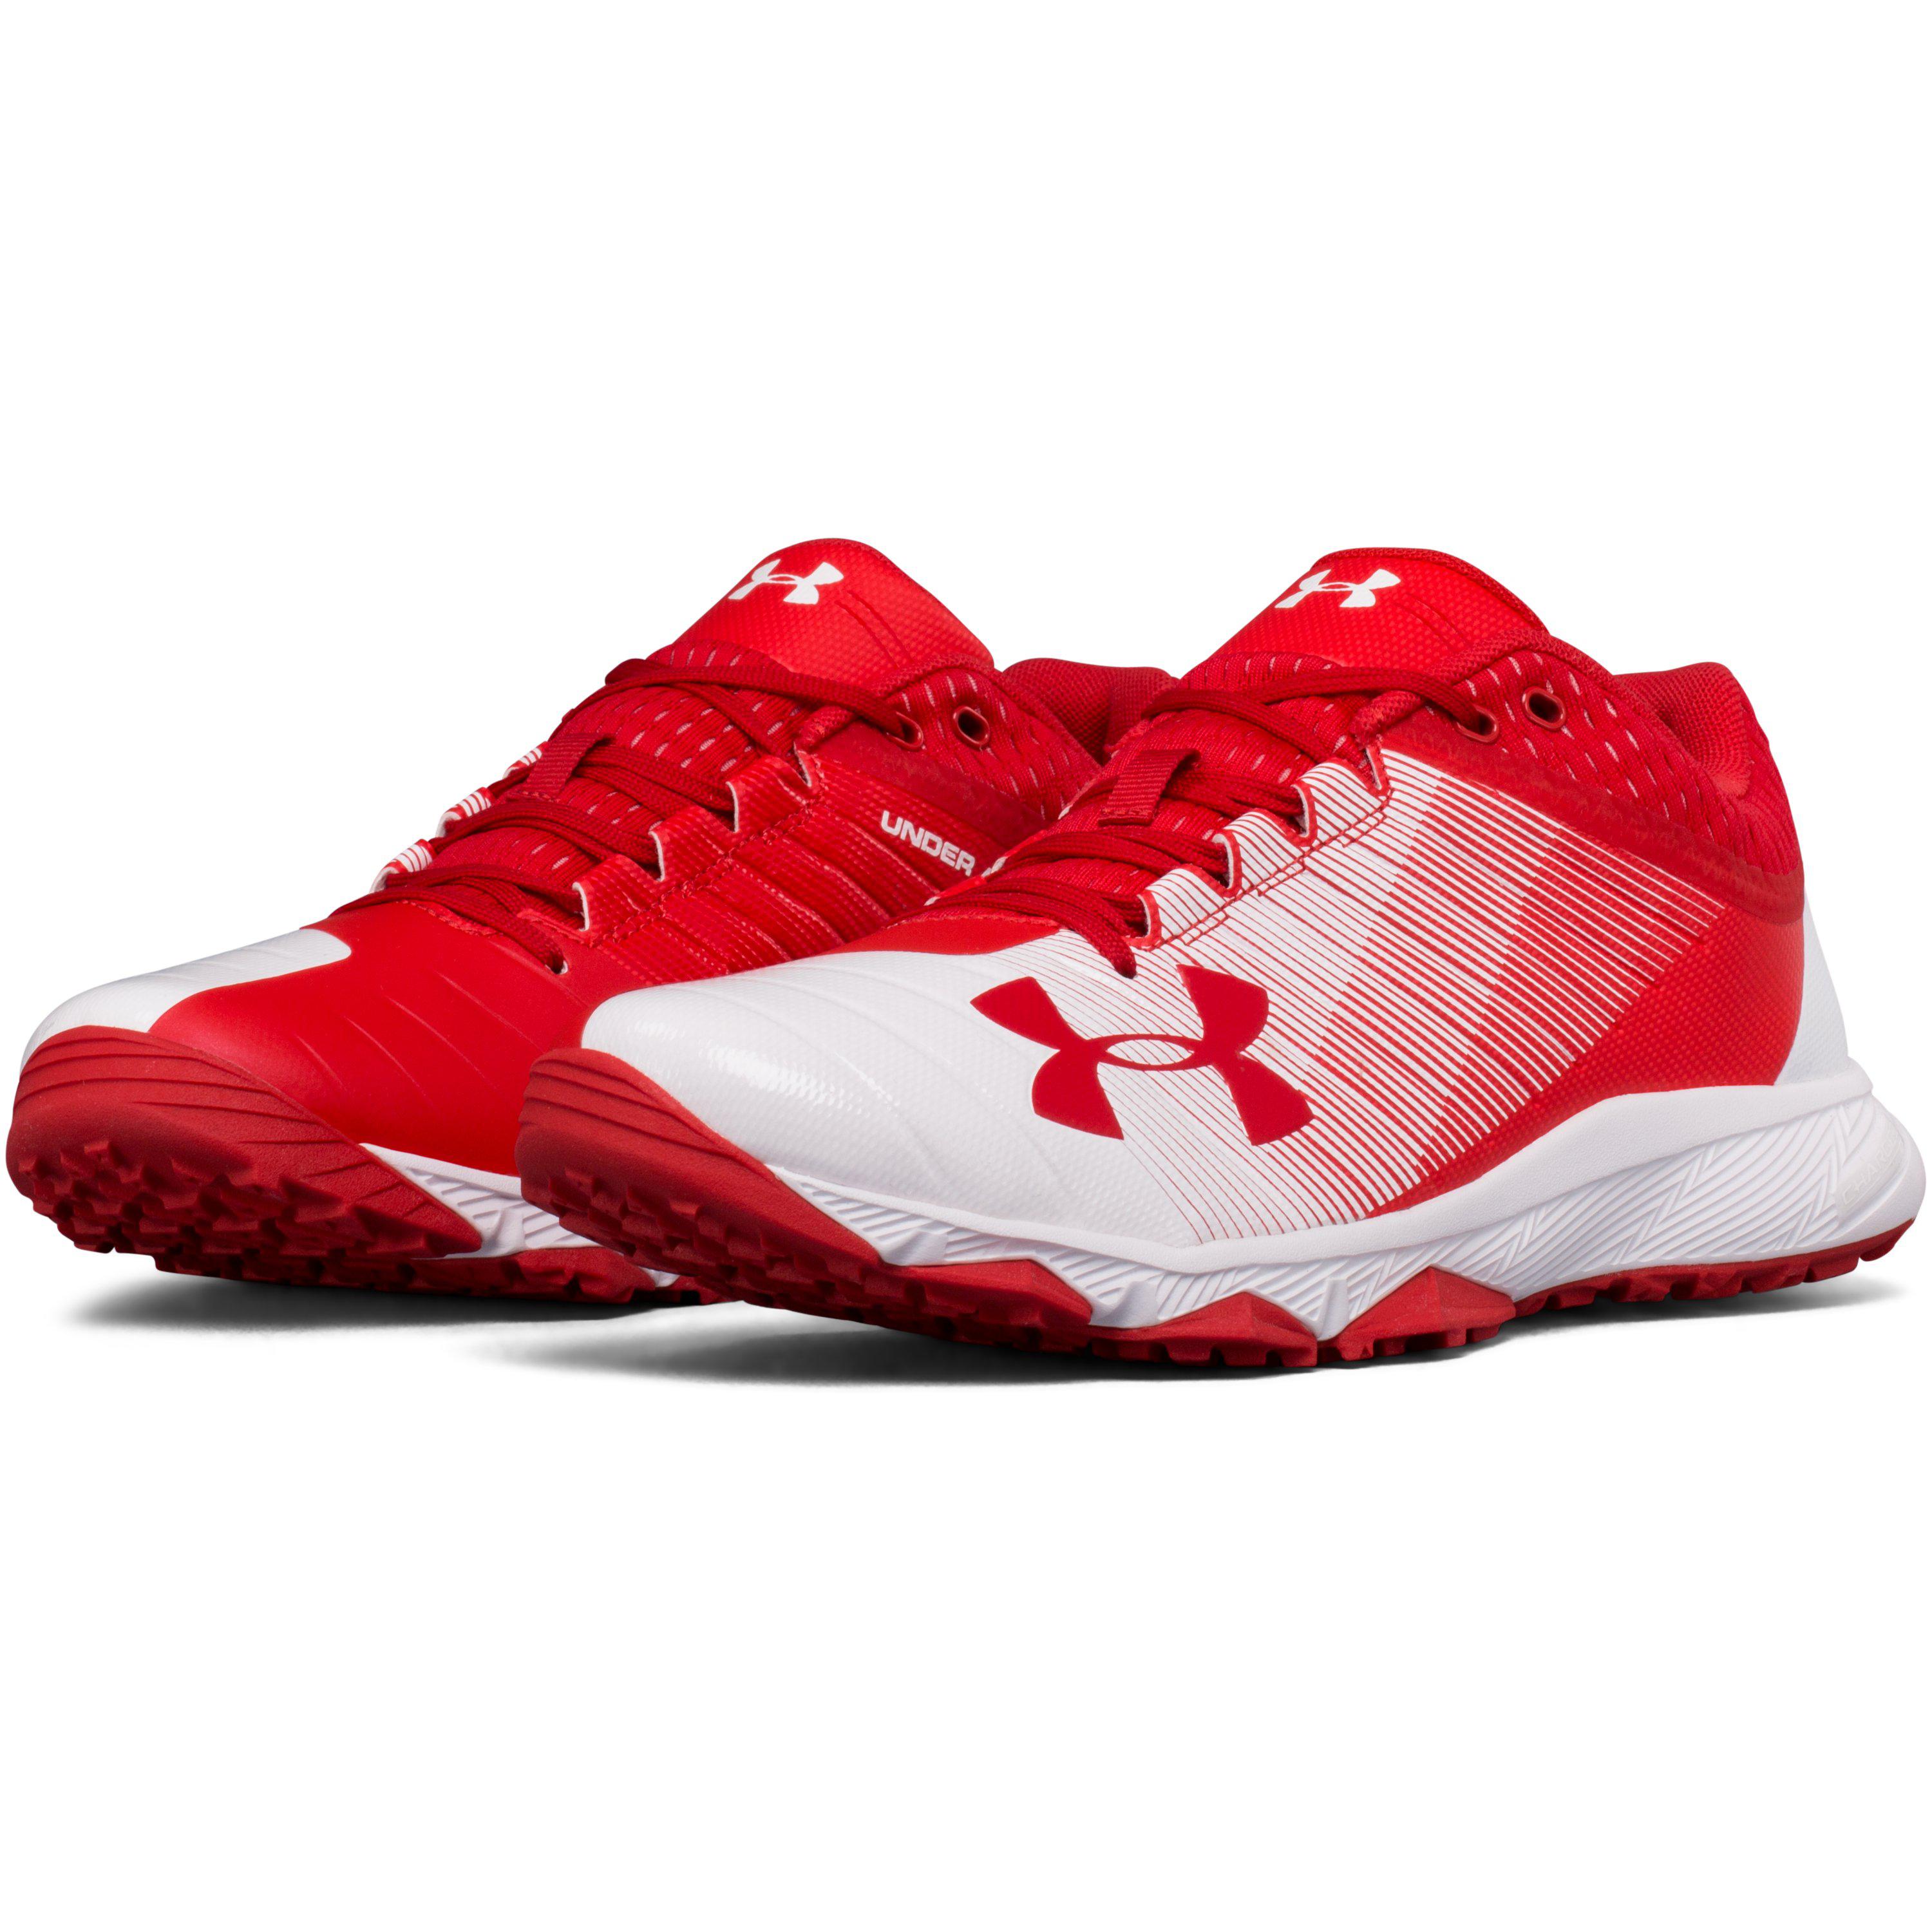 Under Armour Synthetic Men's Ua Yard Trainer Baseball Shoes in Red ...